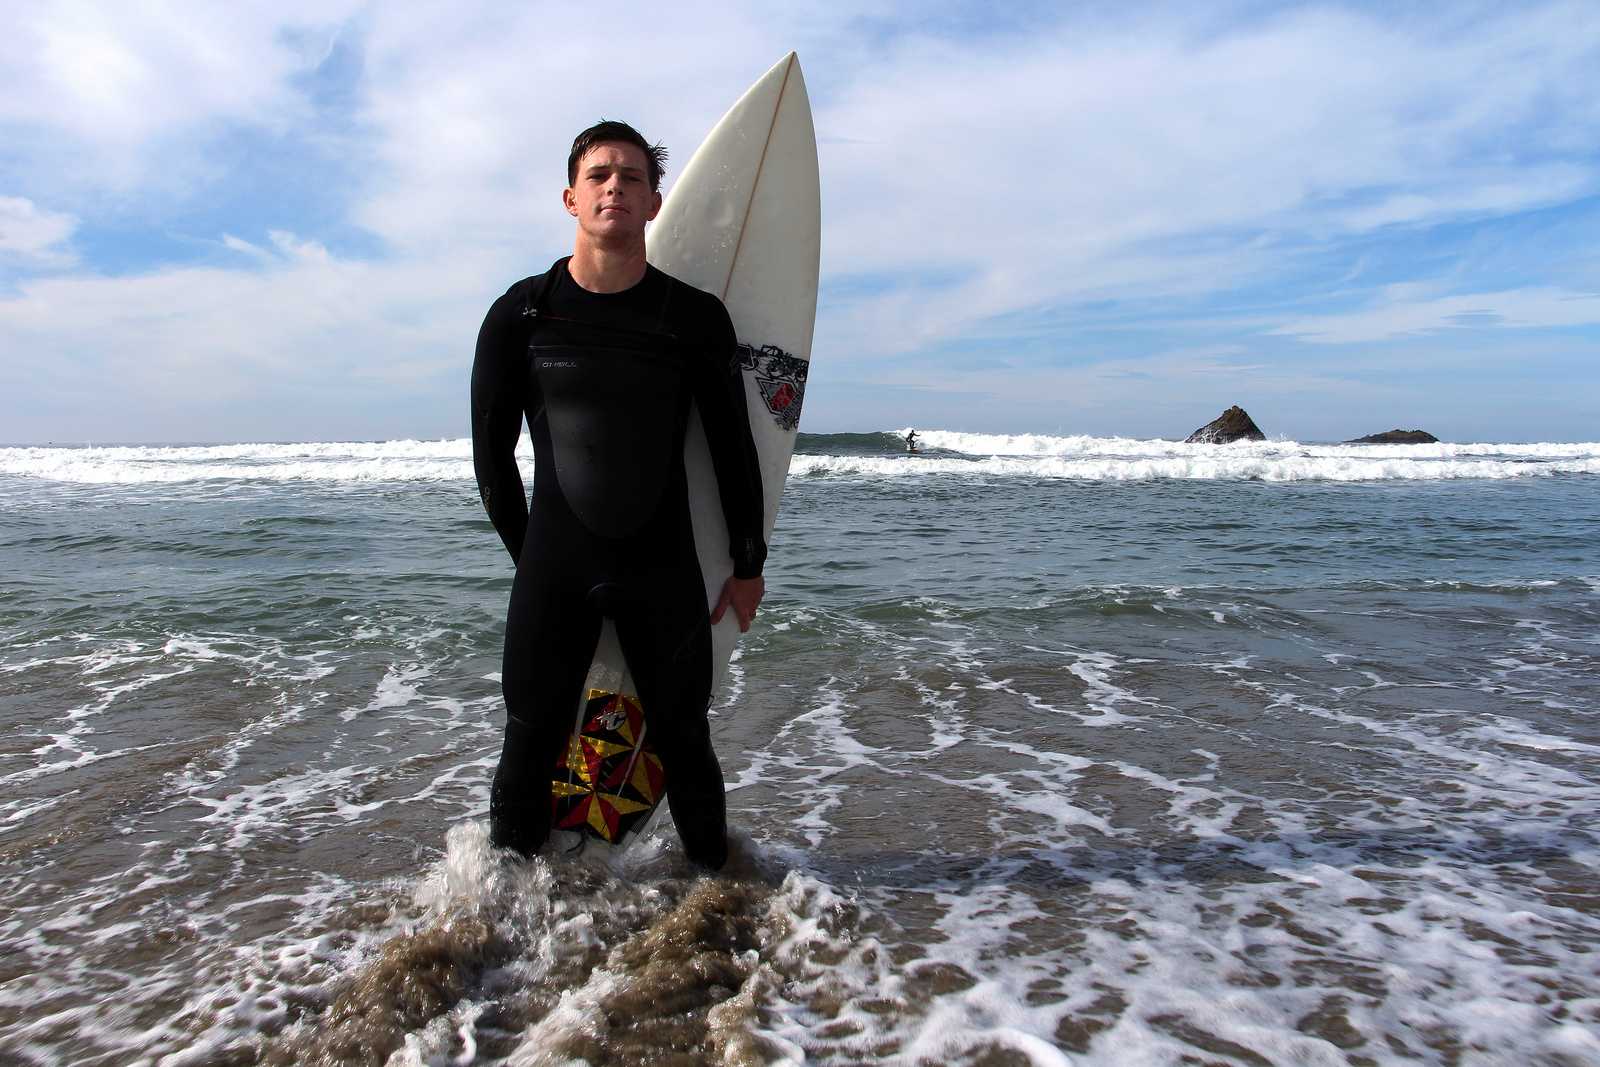 Colin Dwyer, a Psychology major at SF State, stands on the shore of Pacifica State Beach, Monday, Nov. 11, 2013. Dwyer is a professional surfer who will be competing in the Mavericks Invitational, a big wave surf contest in Half Moon Bay, so he trains by surfing at a local beach. Photo by Gavin McIntyre / Xpress